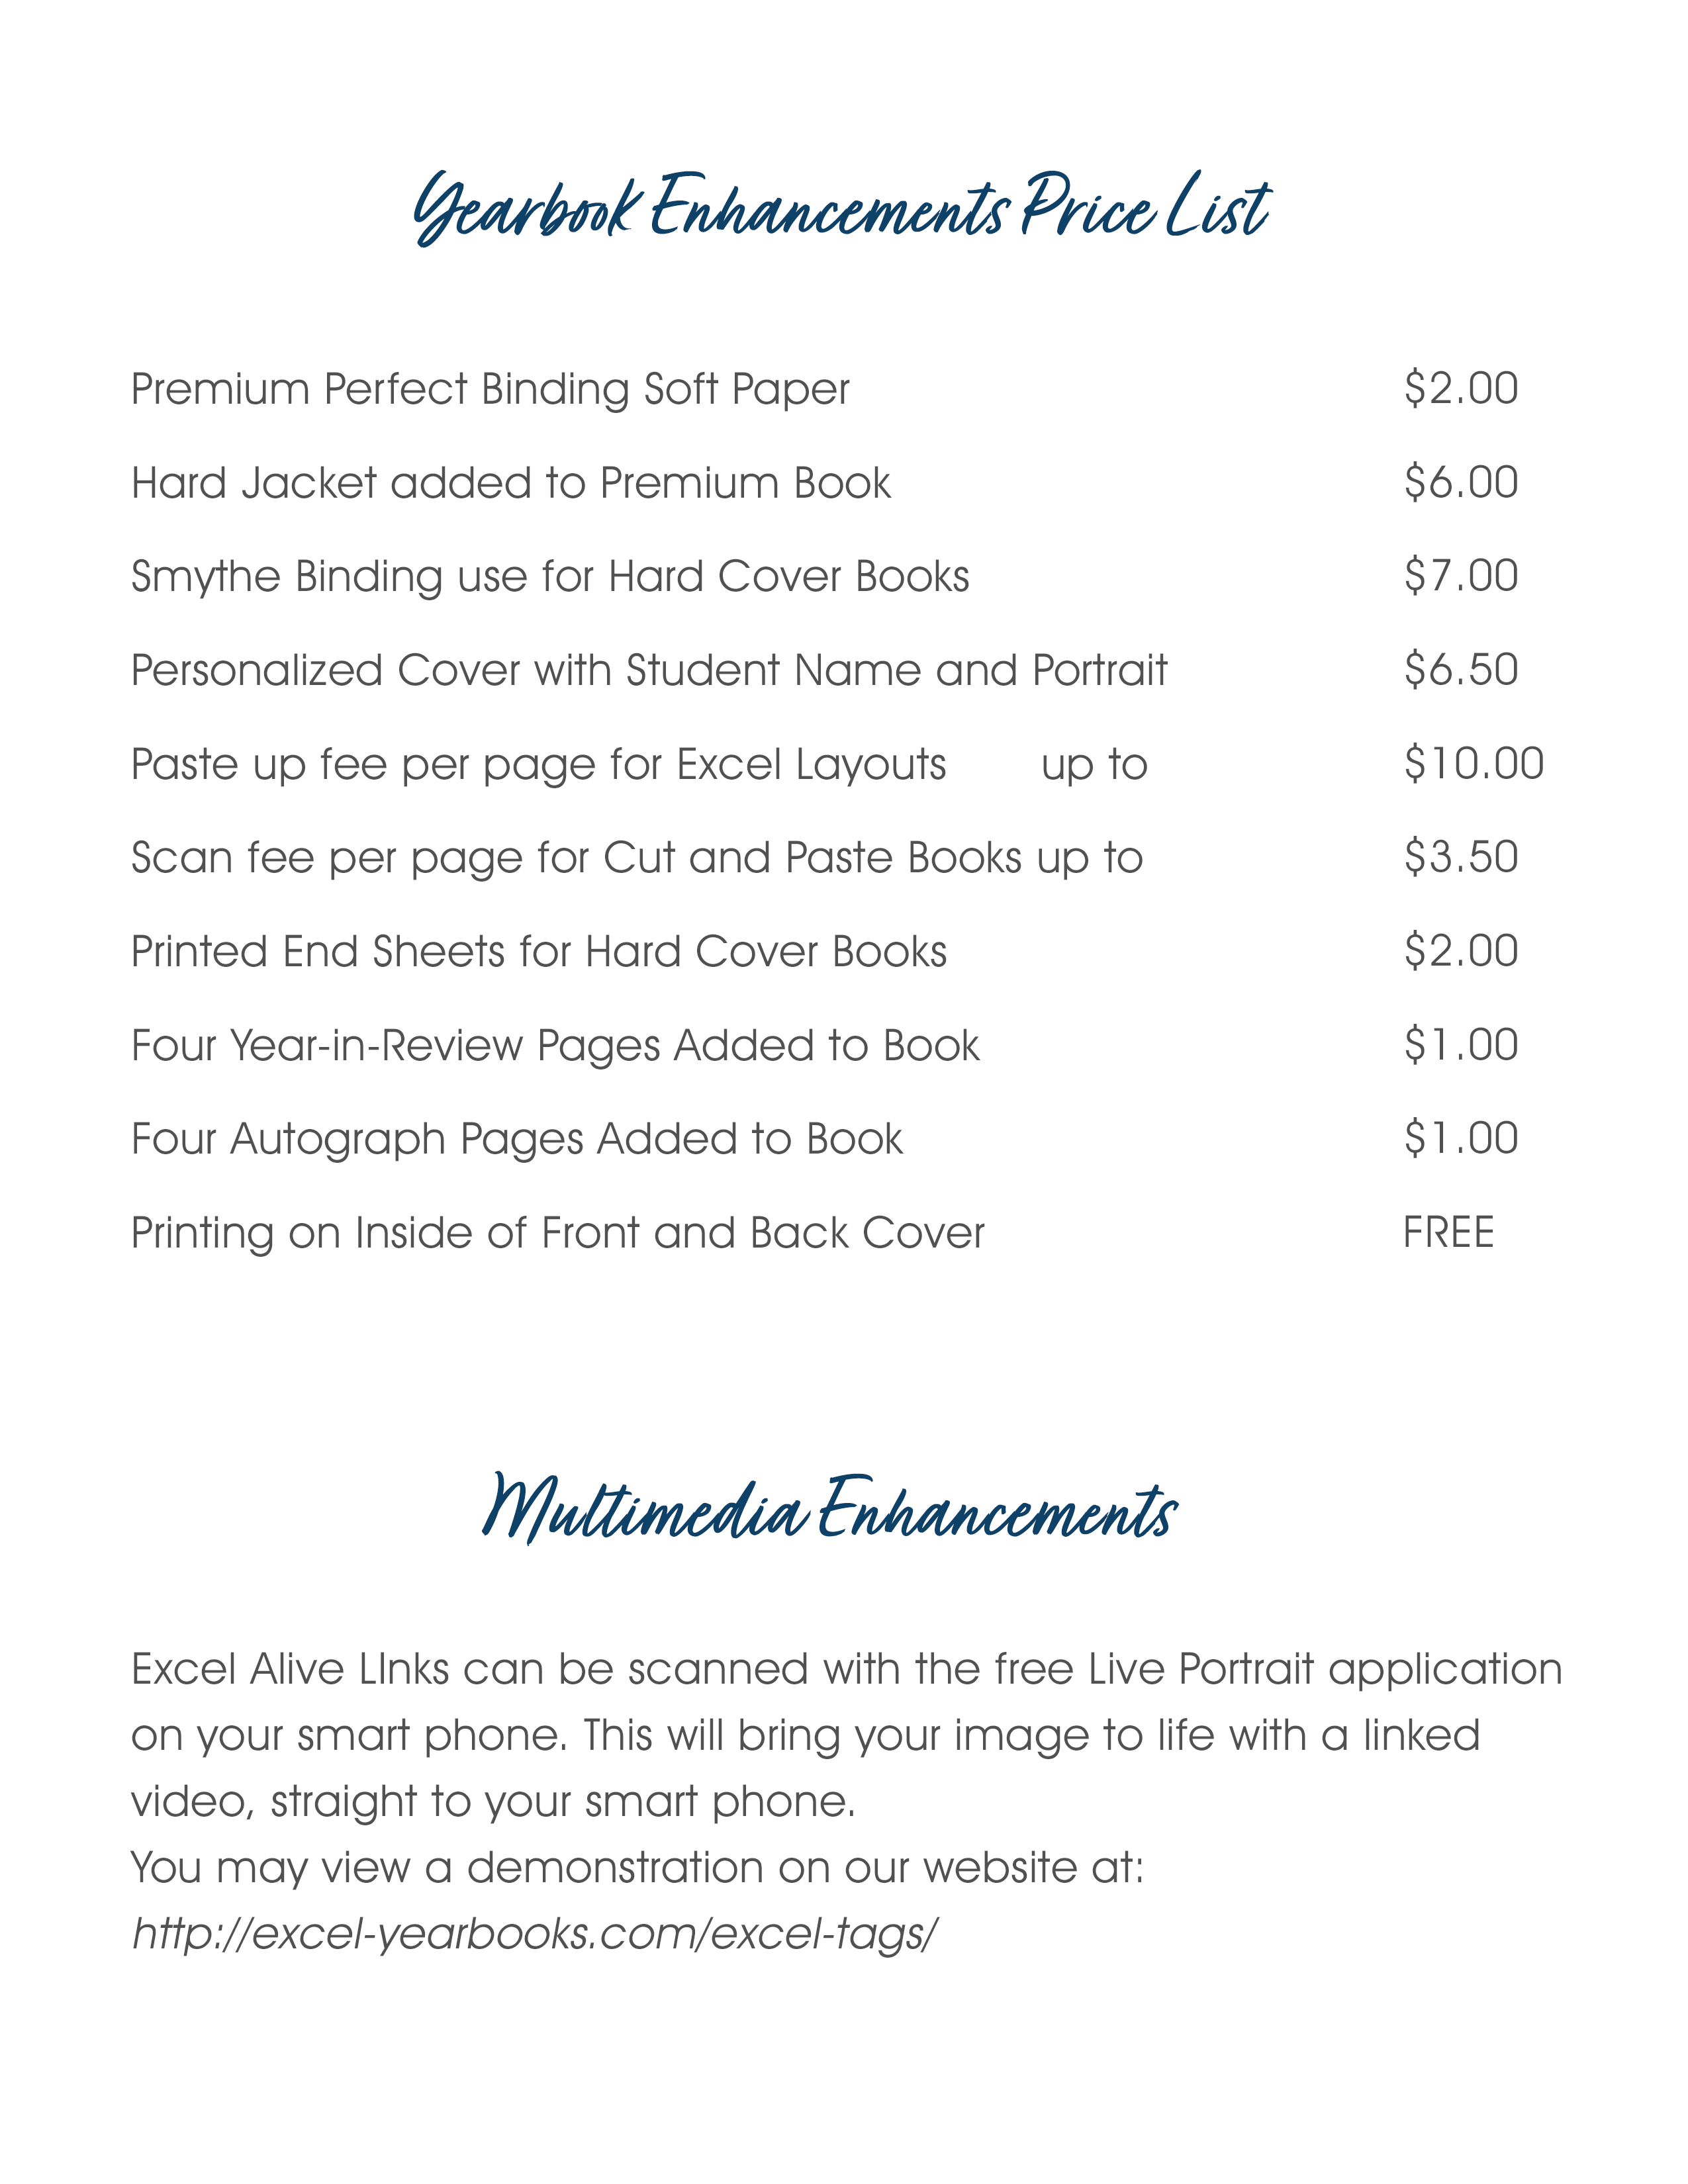 Yearbook Enhancements, Add On's Price List